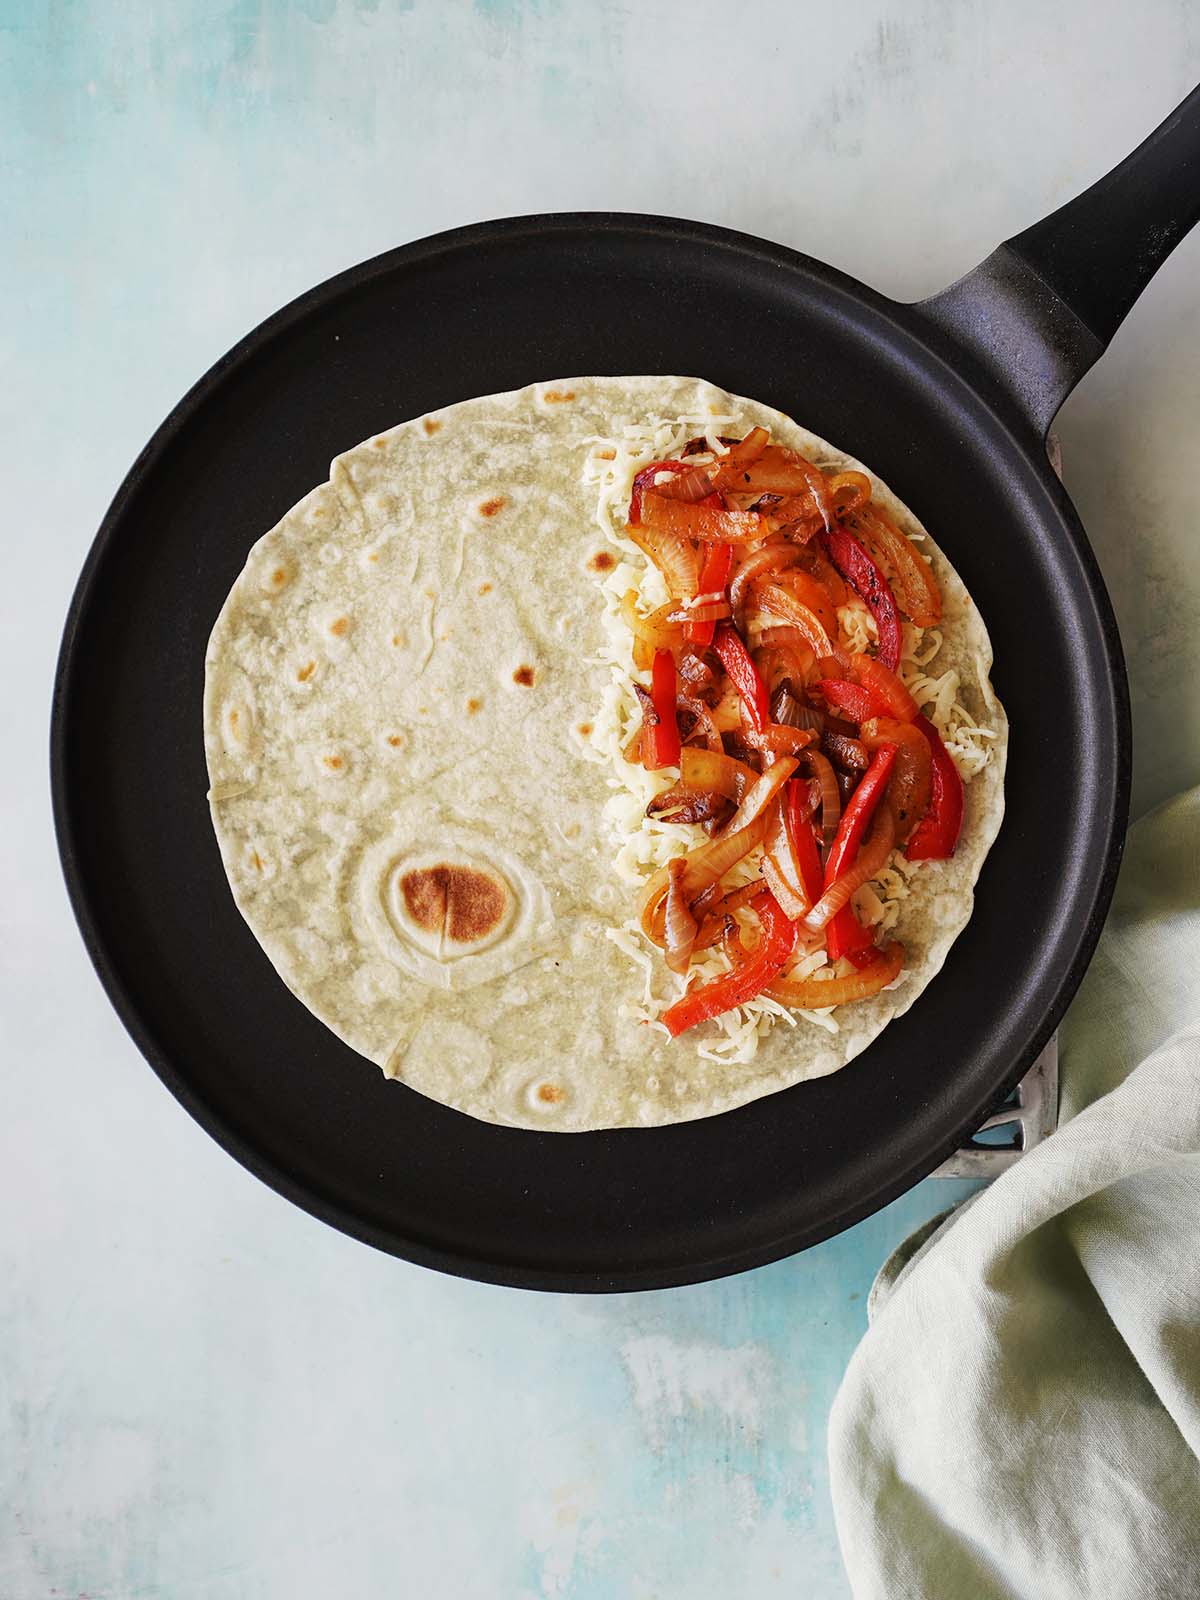 A flour tortilla topped with cheese and sauteed veggies on a skillet.